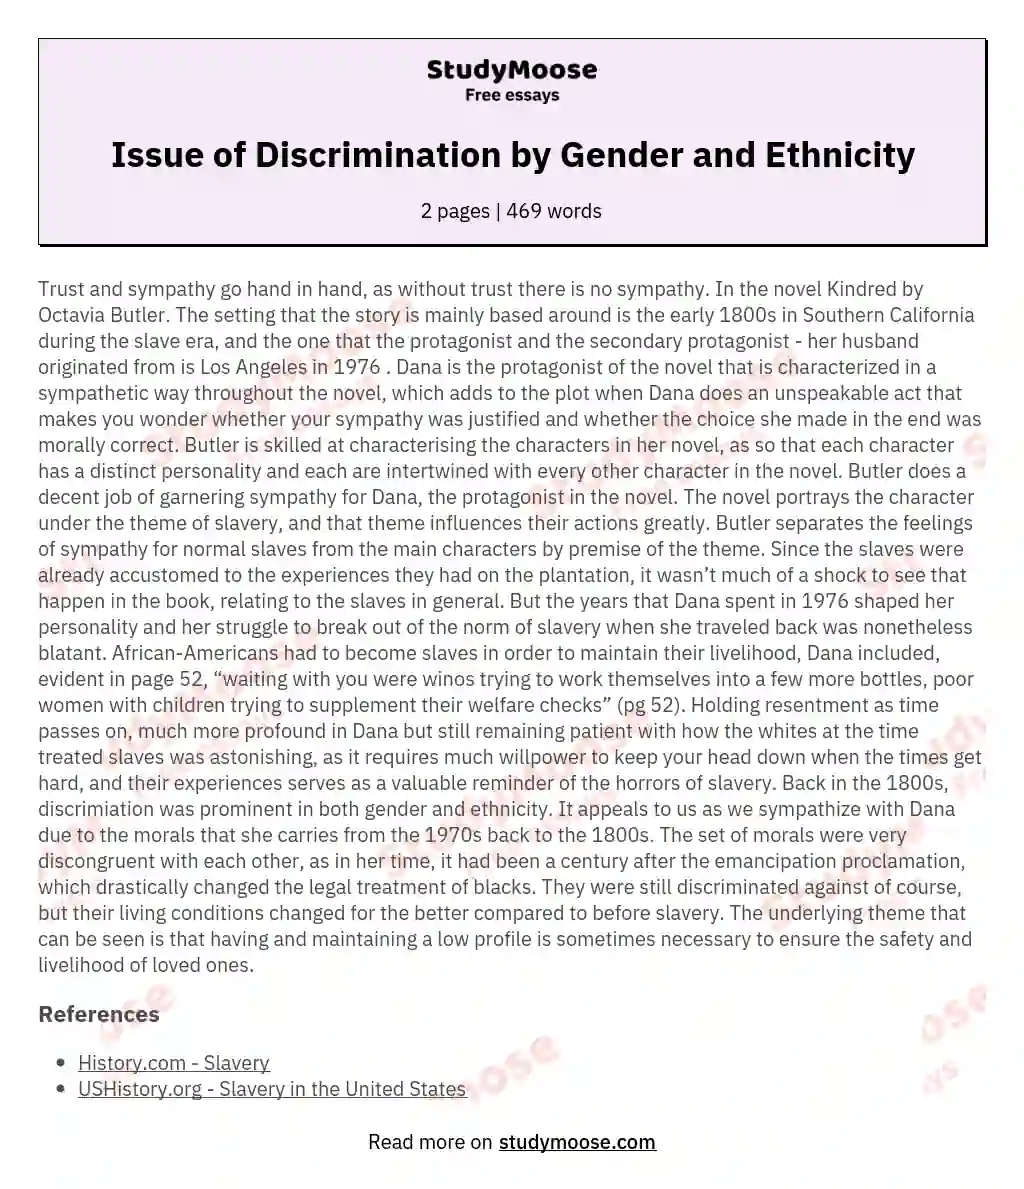 Issue of Discrimination by Gender and Ethnicity essay